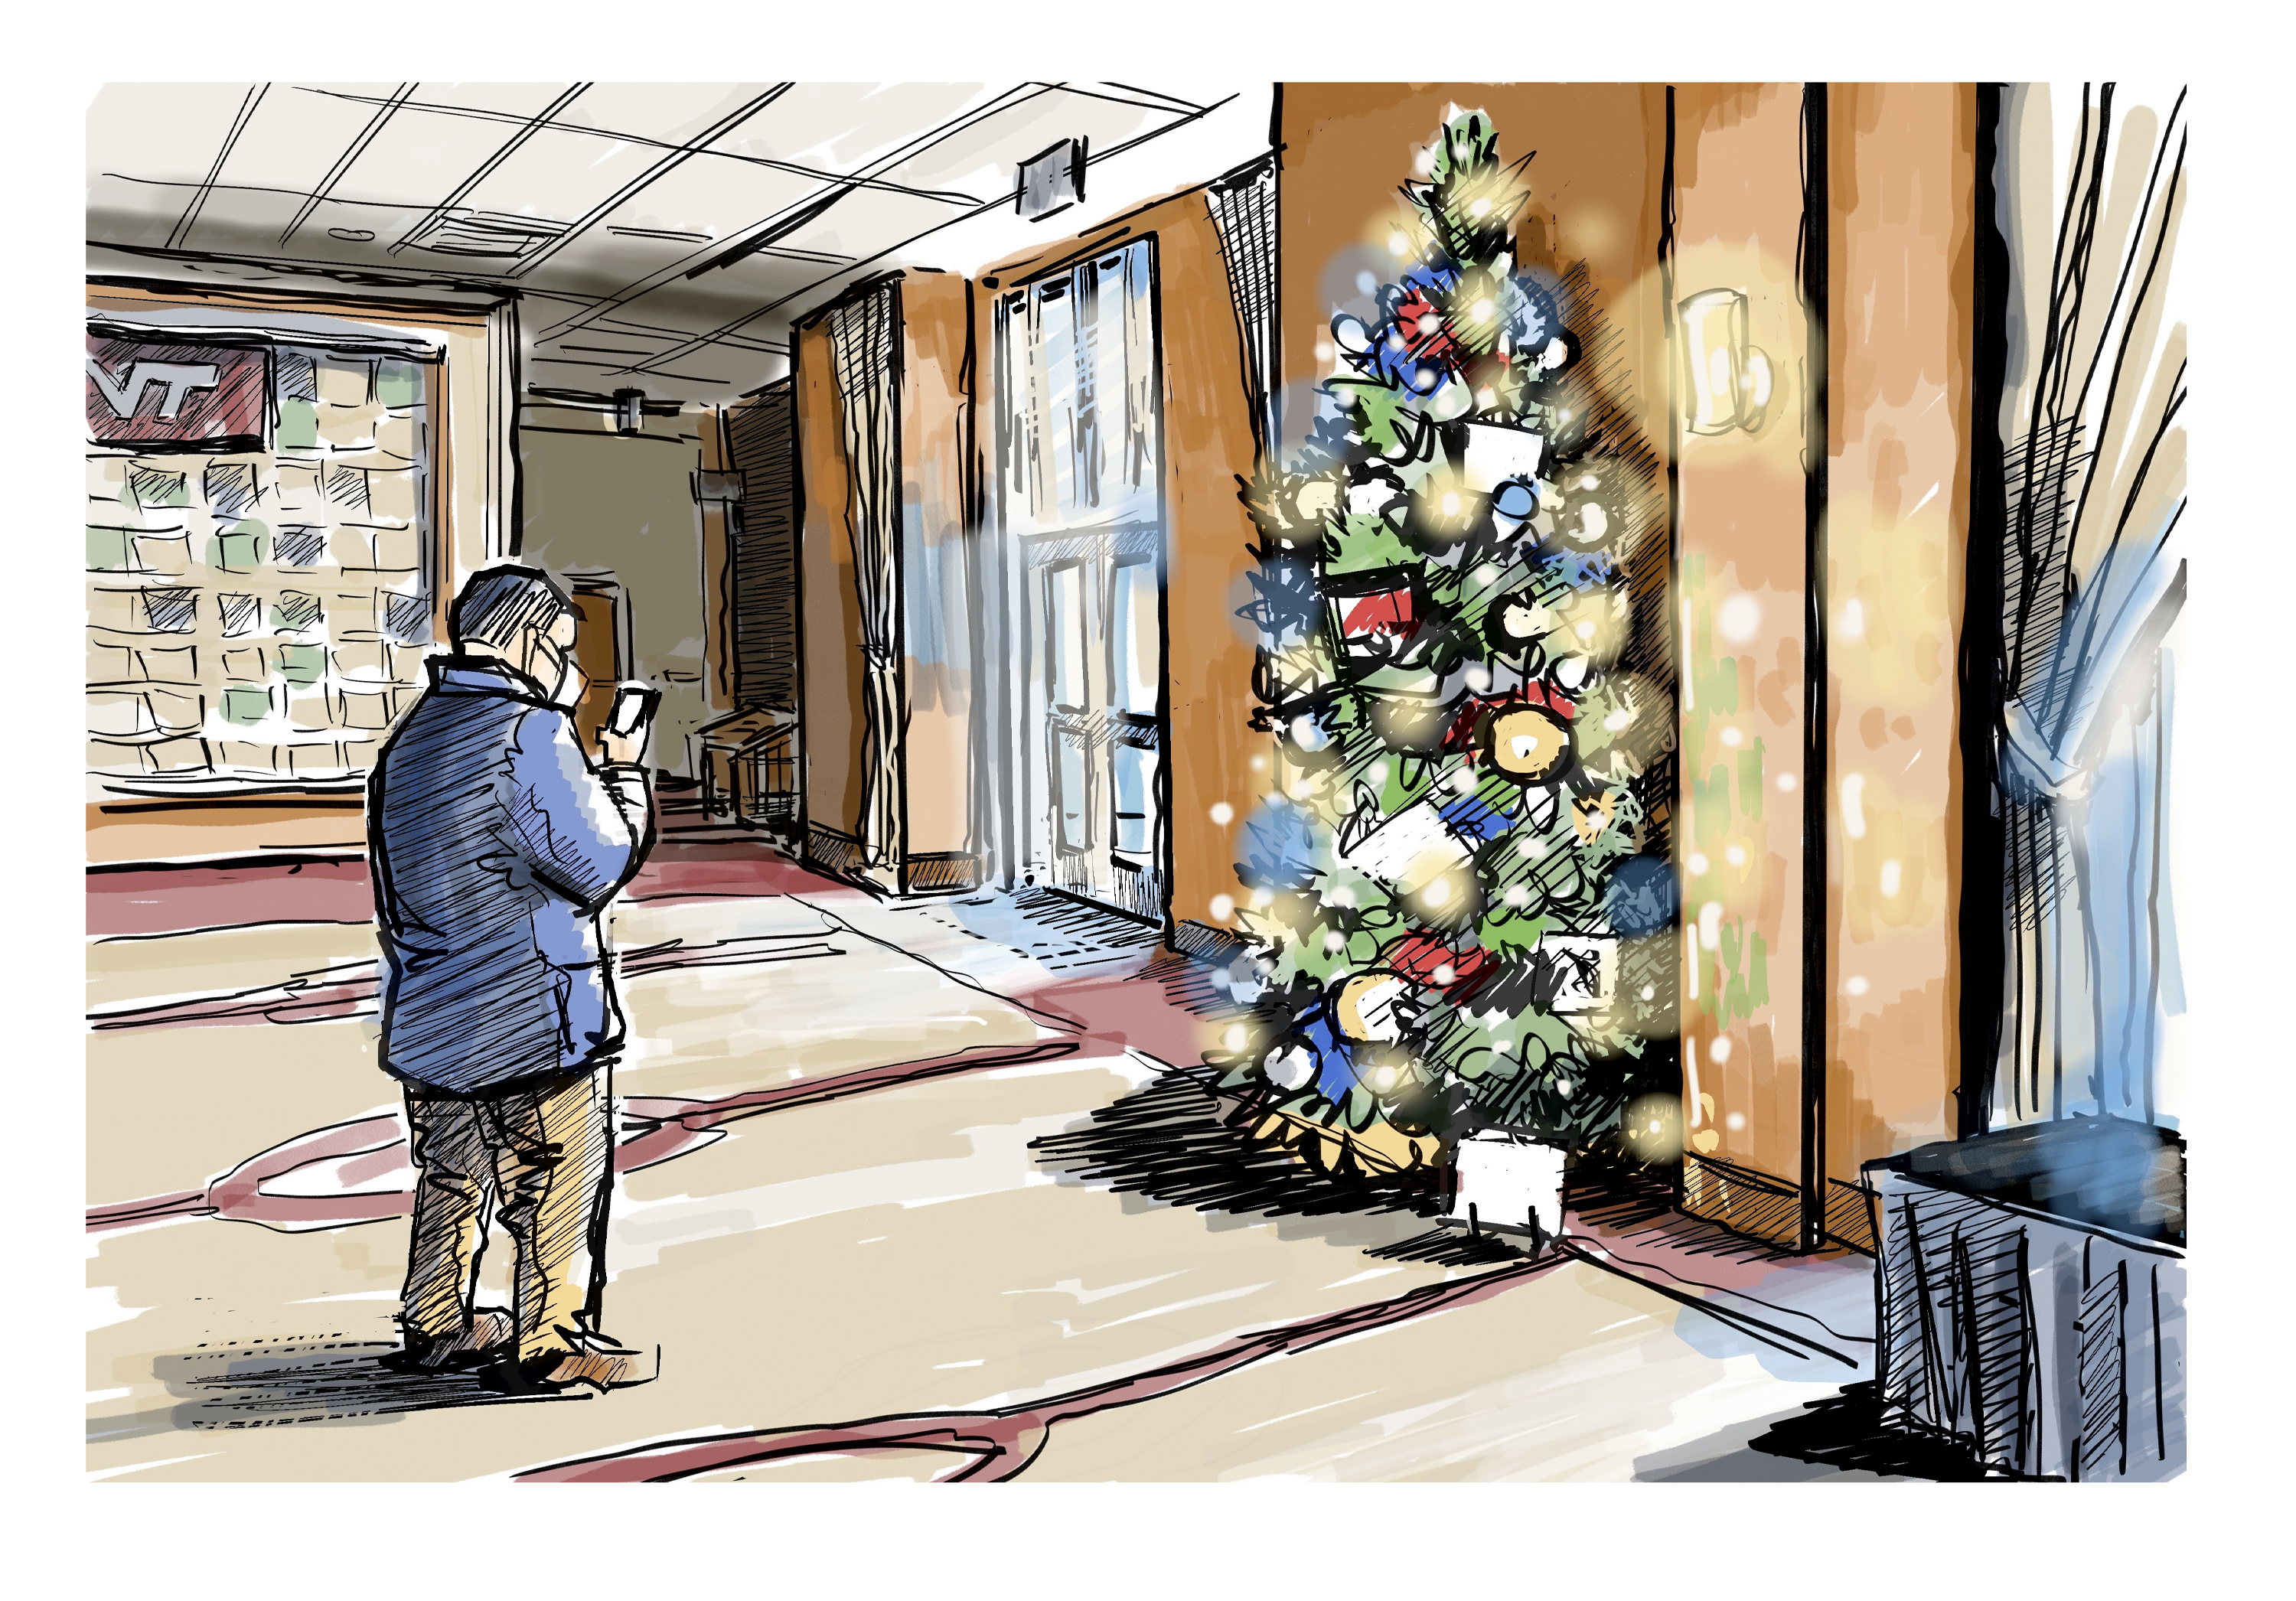 Digital sketch of a man taking a picture of a lit tree inside the Inn at Virginia Tech